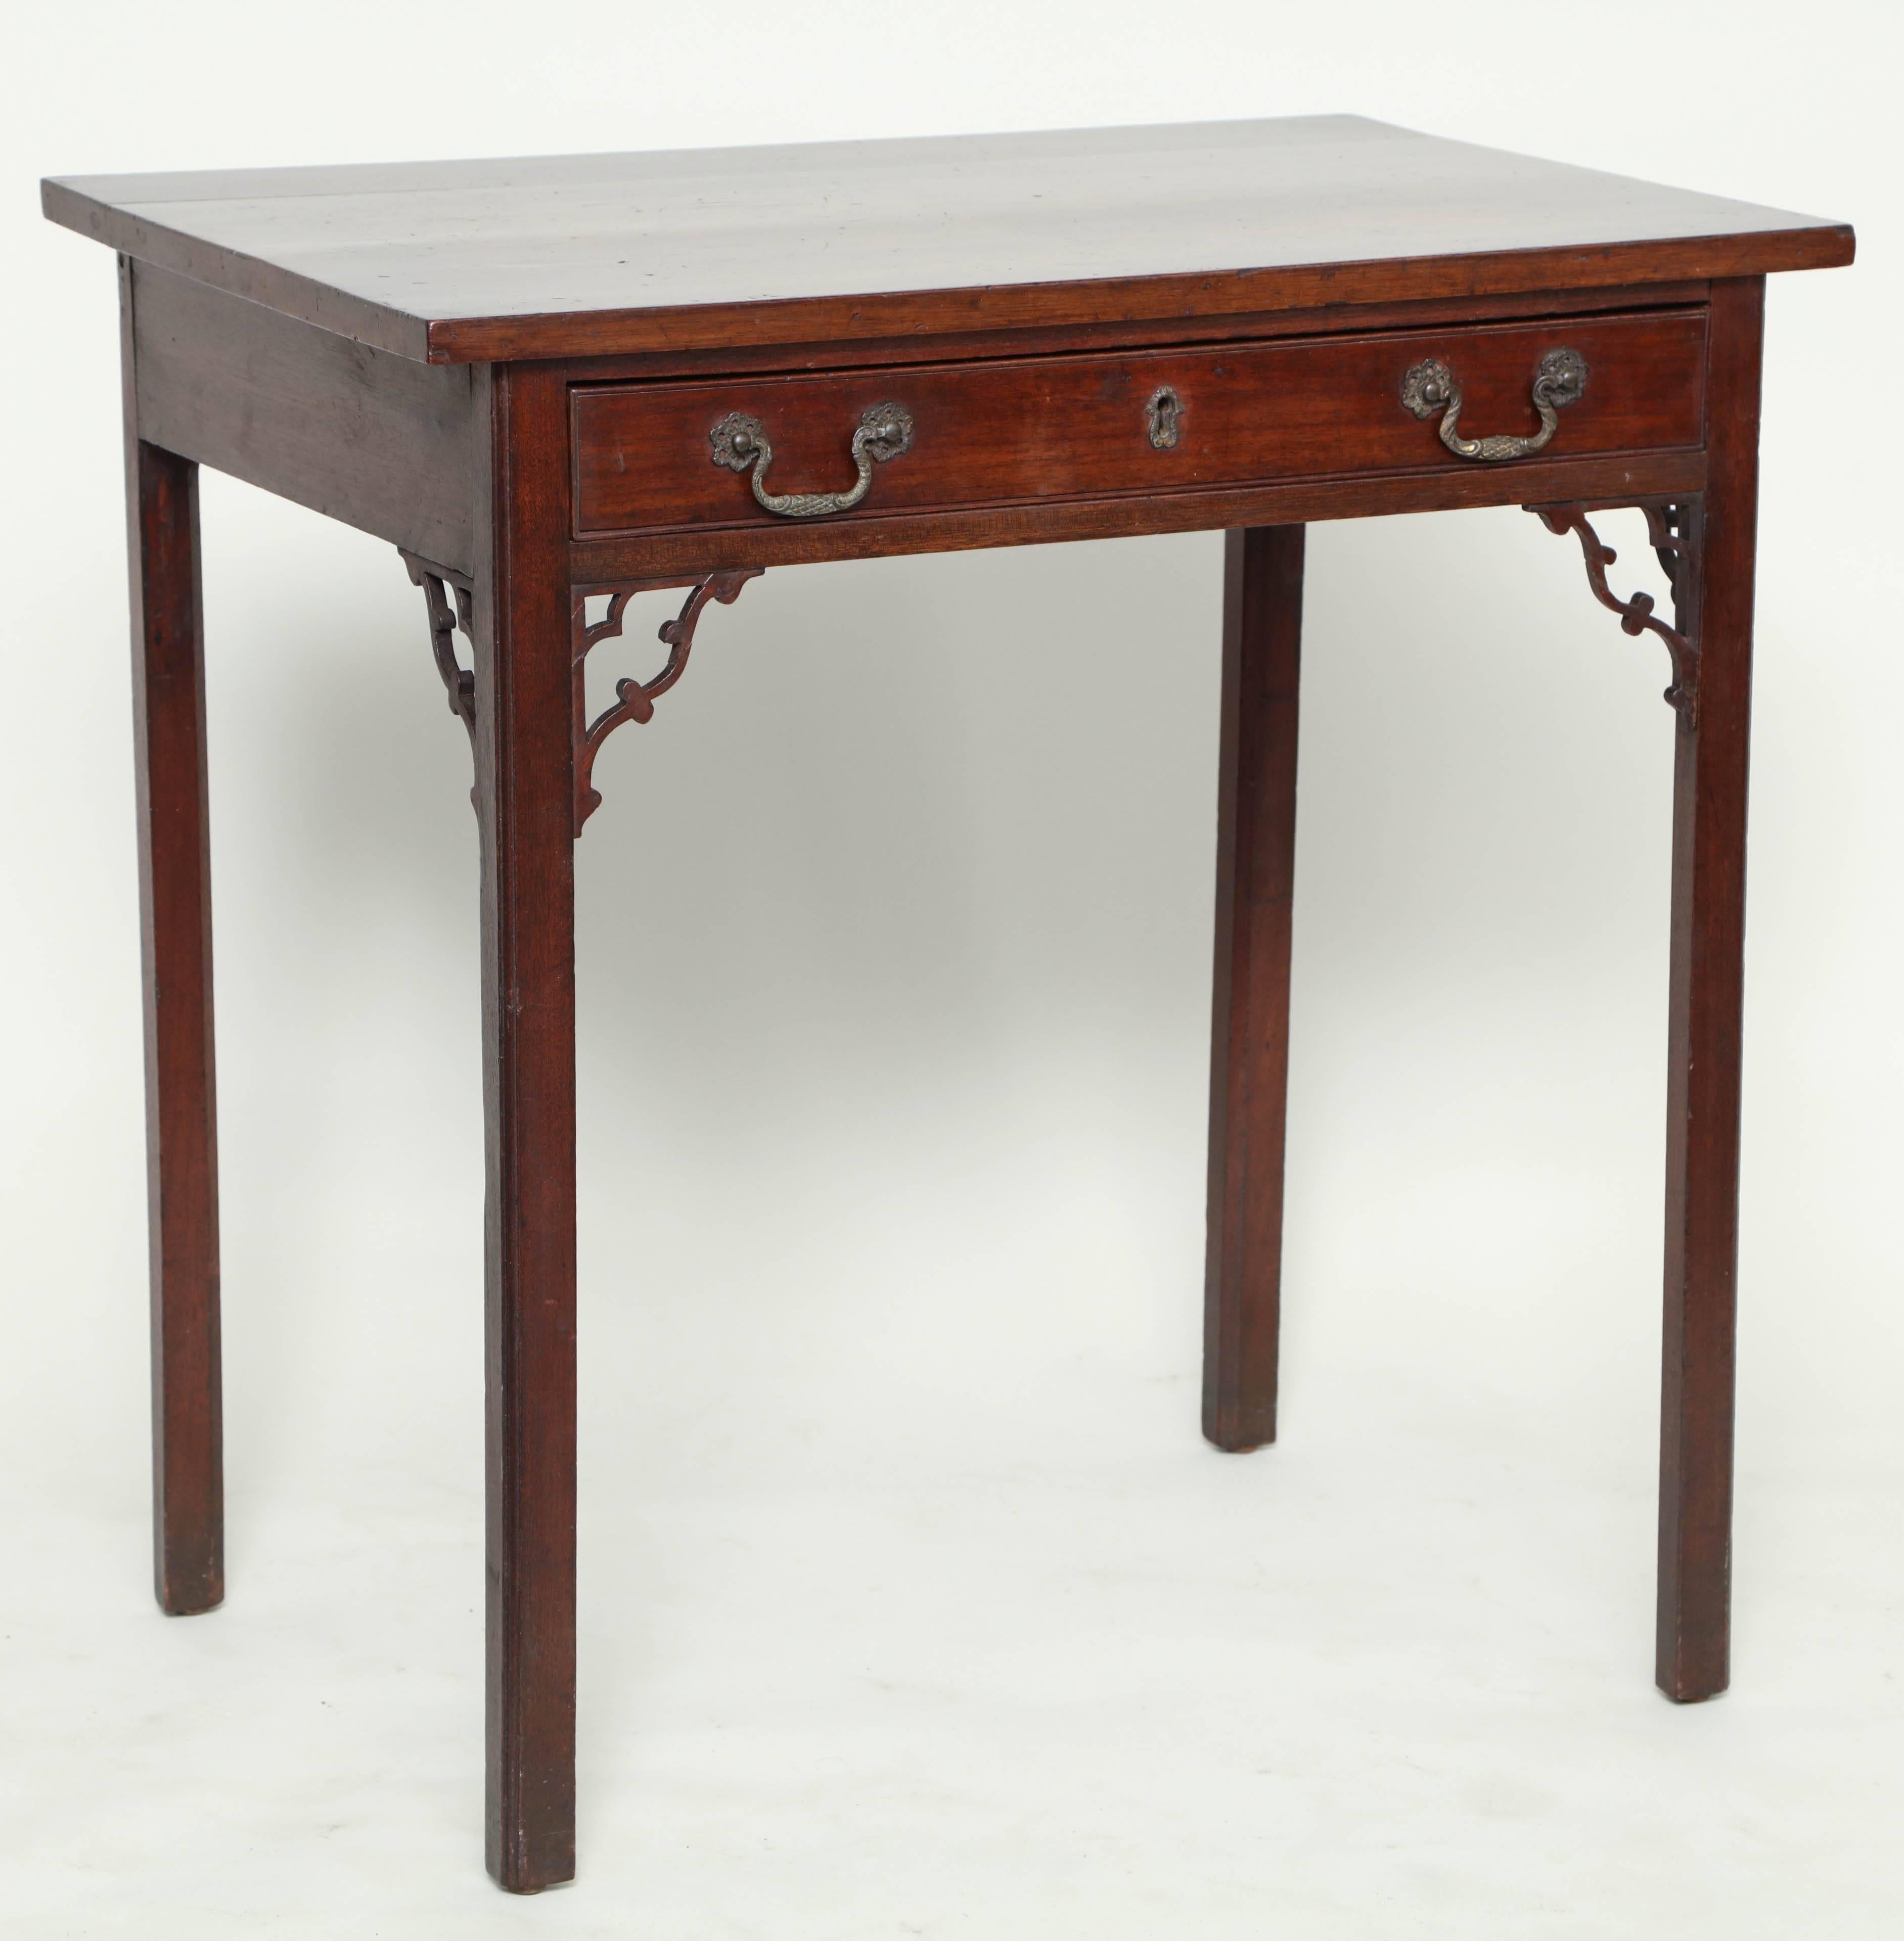 Good George III mahogany side table, the square edged top over single drawer having original highly detailed brasses and escutcheon, over four square legs adorned with open fretted corner brackets, the whole with rich, pleasing color.